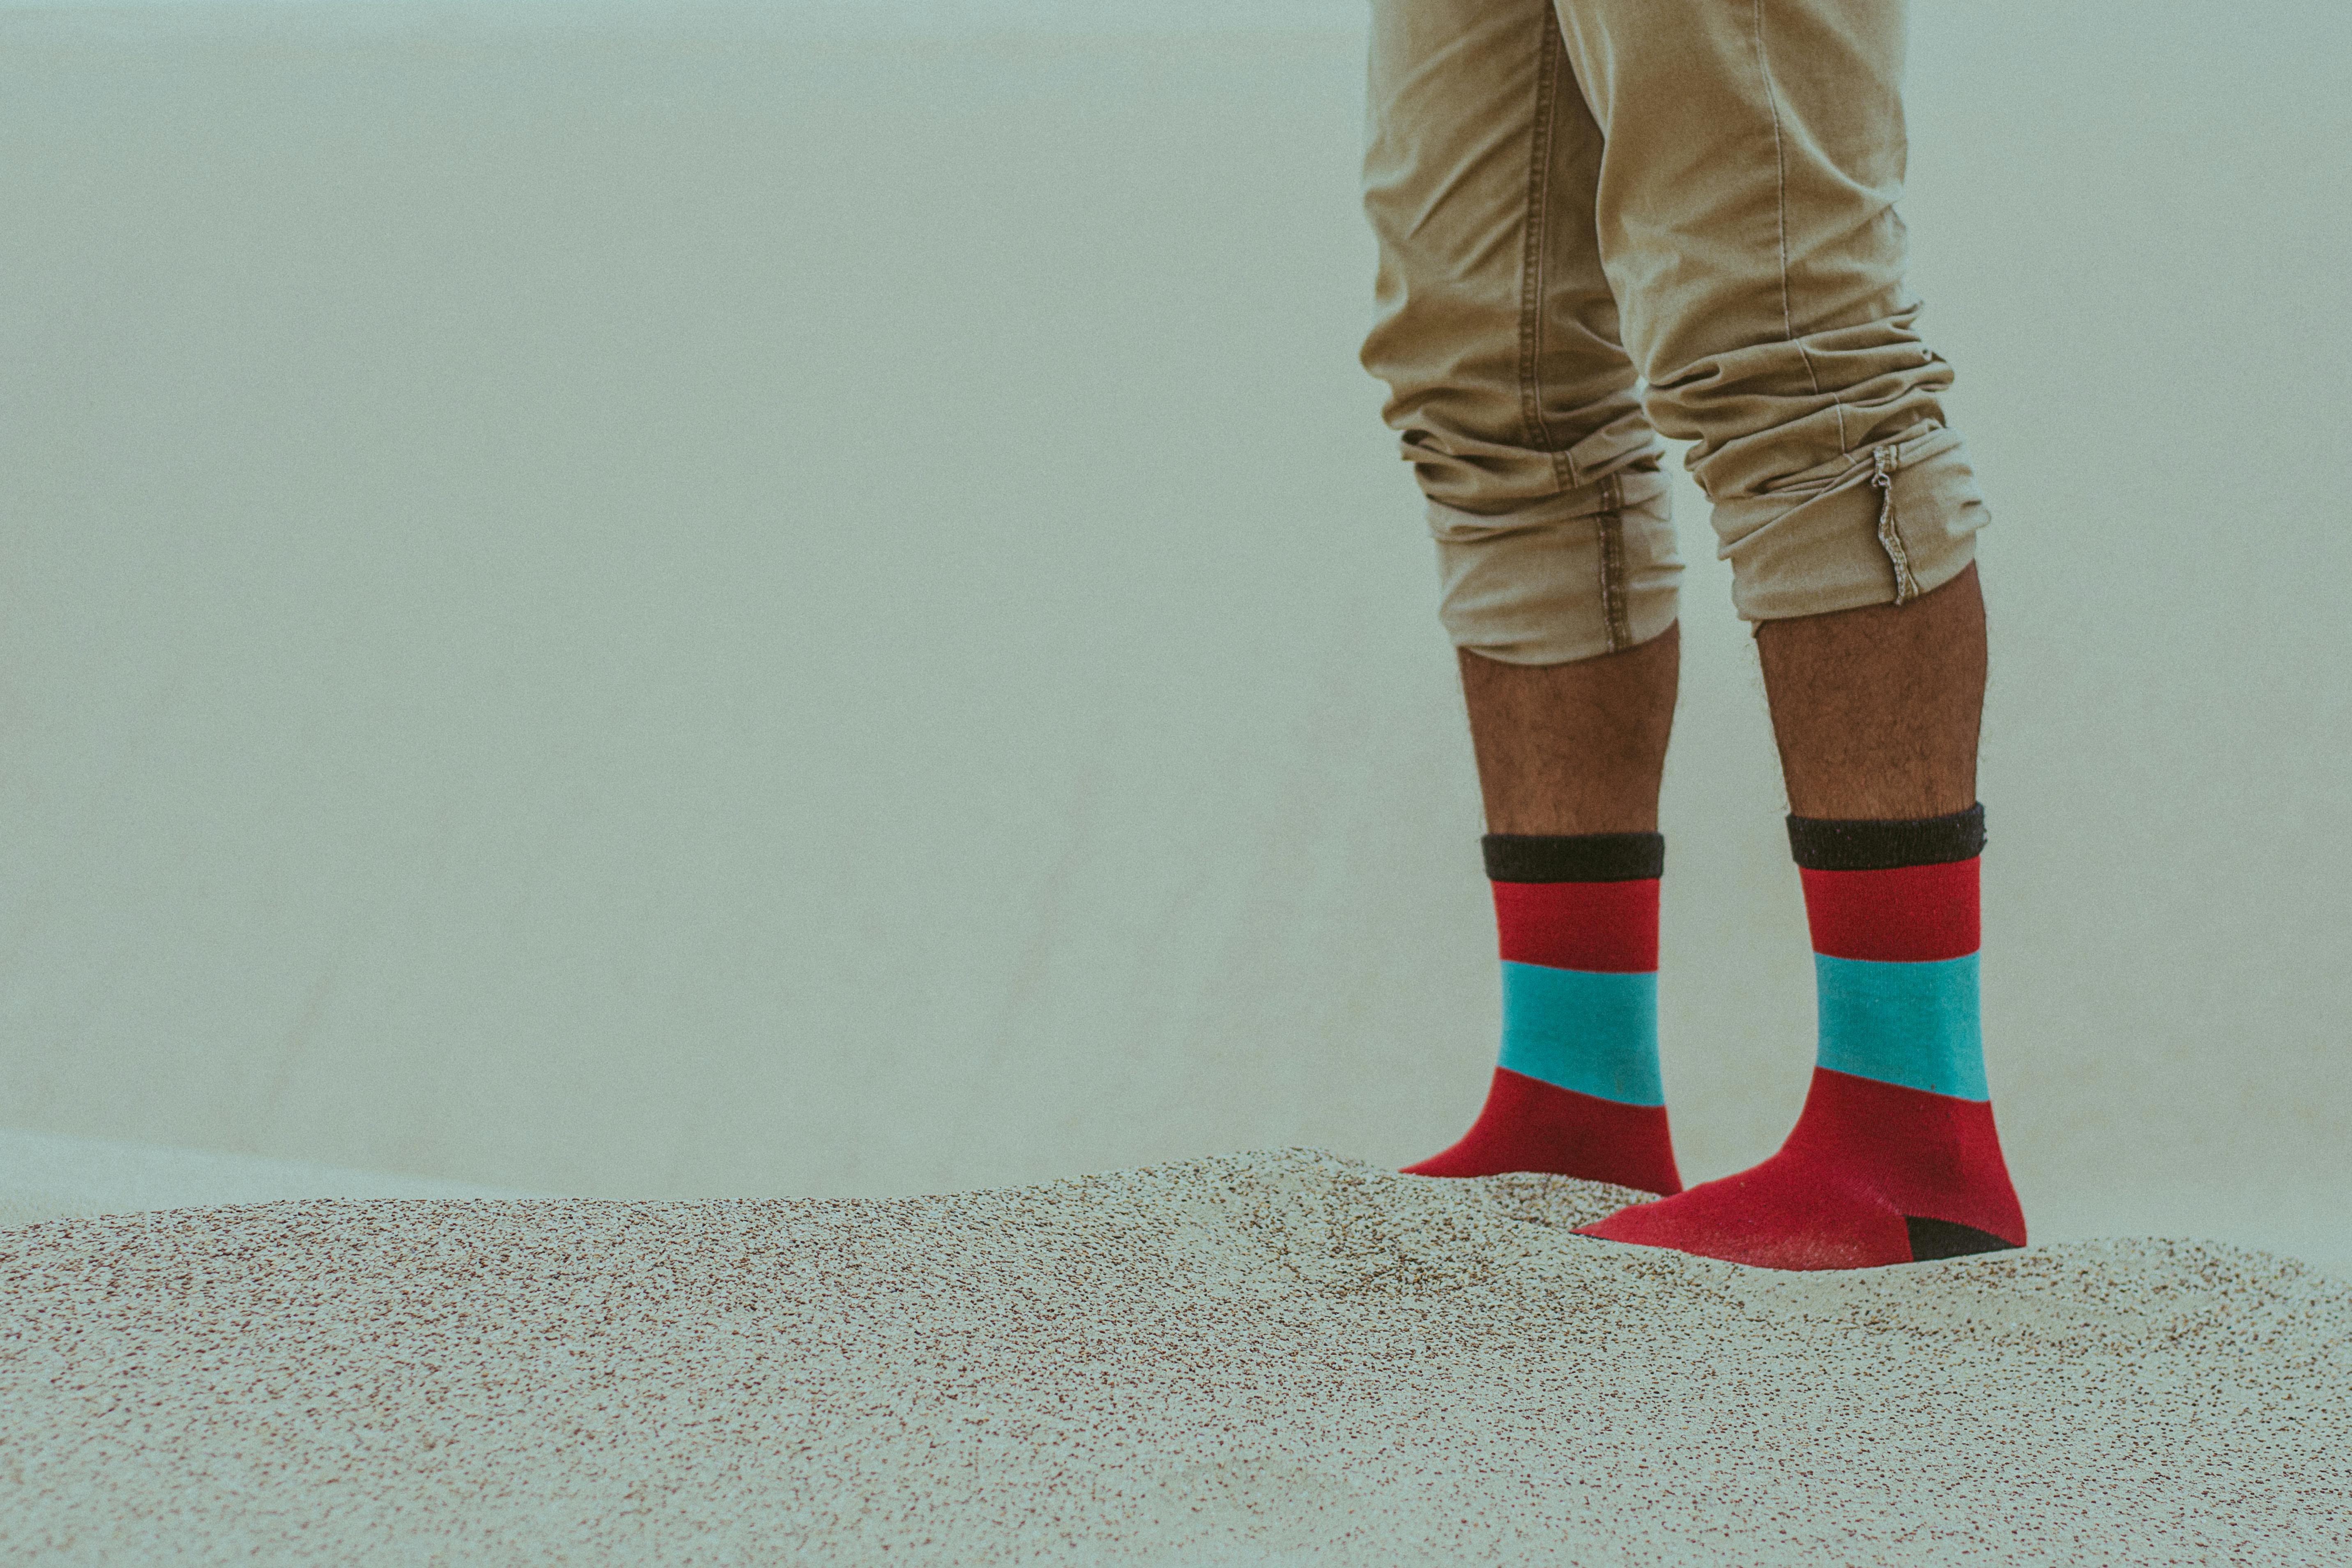 person wearing red socks standing on sand